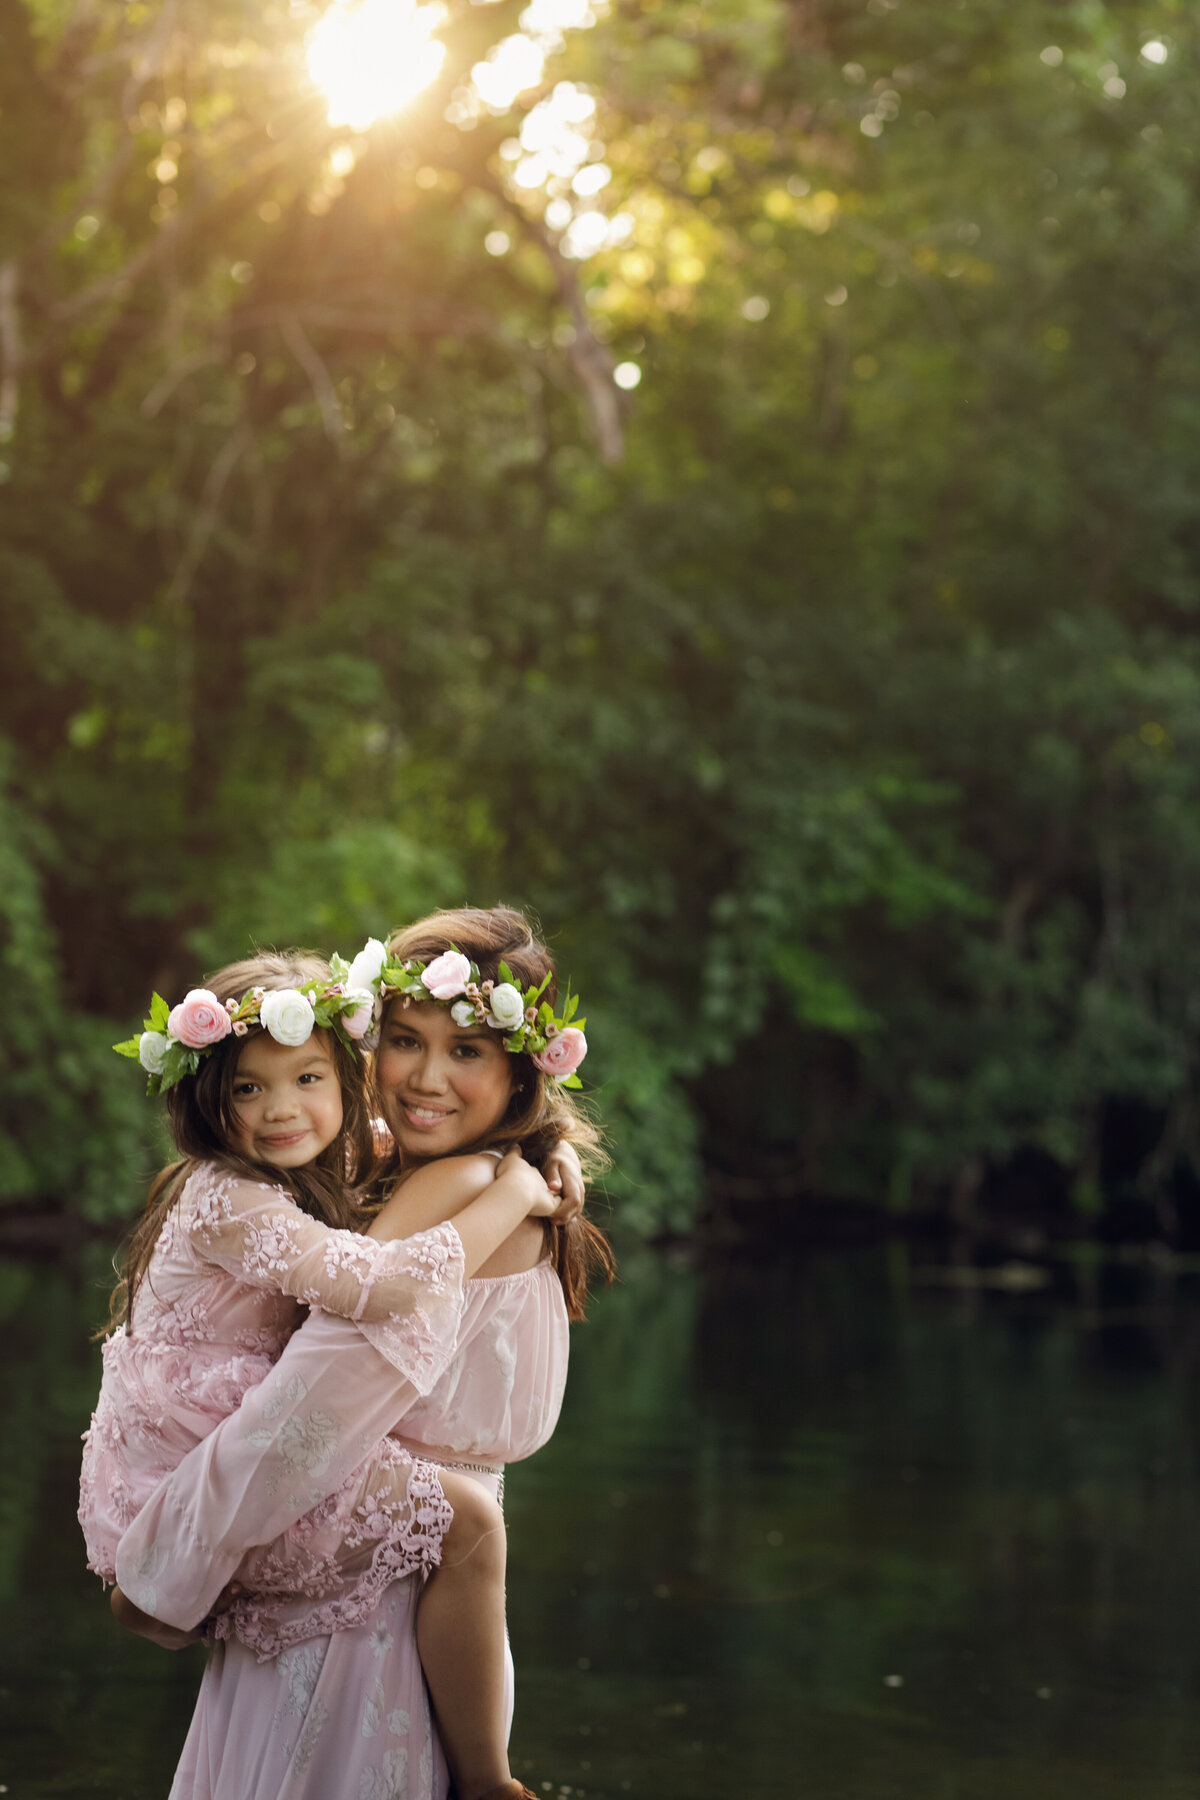 mom and daughter in pink dresses in park